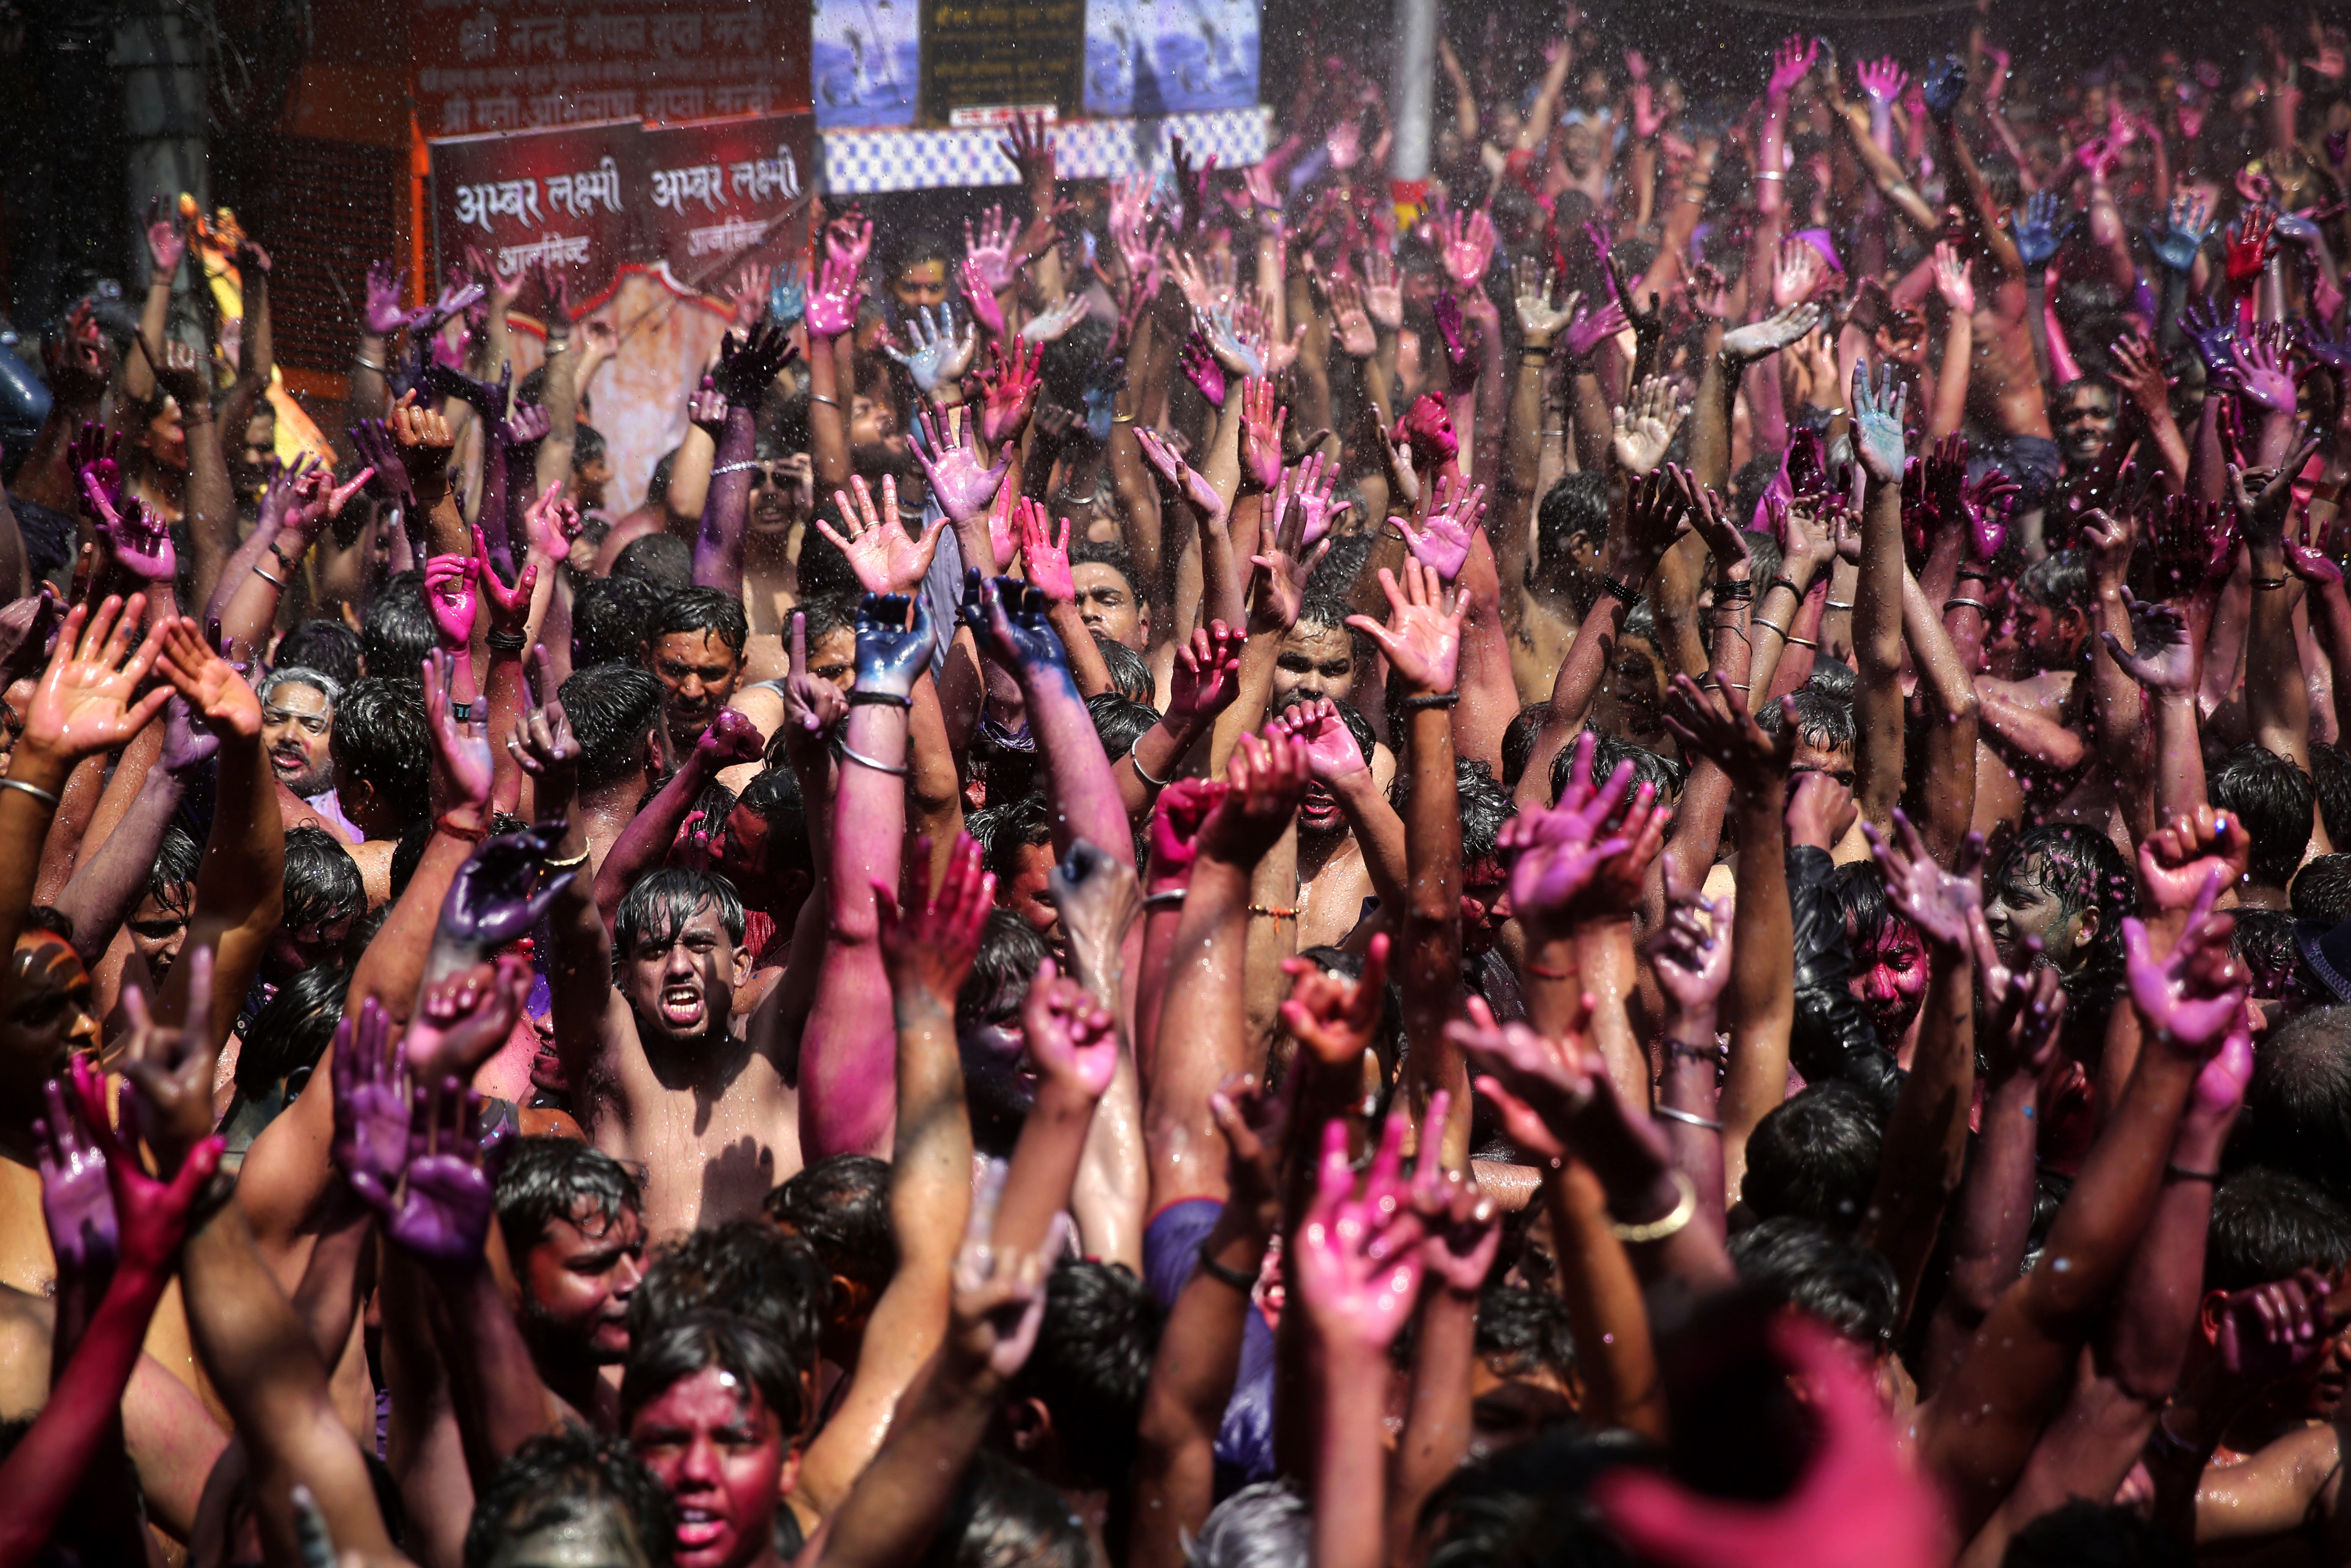 Indian revelers, faces smeared with colored powder, dance during Holi celebrations, or the Hindu festival of colors in Prayagraj - AP